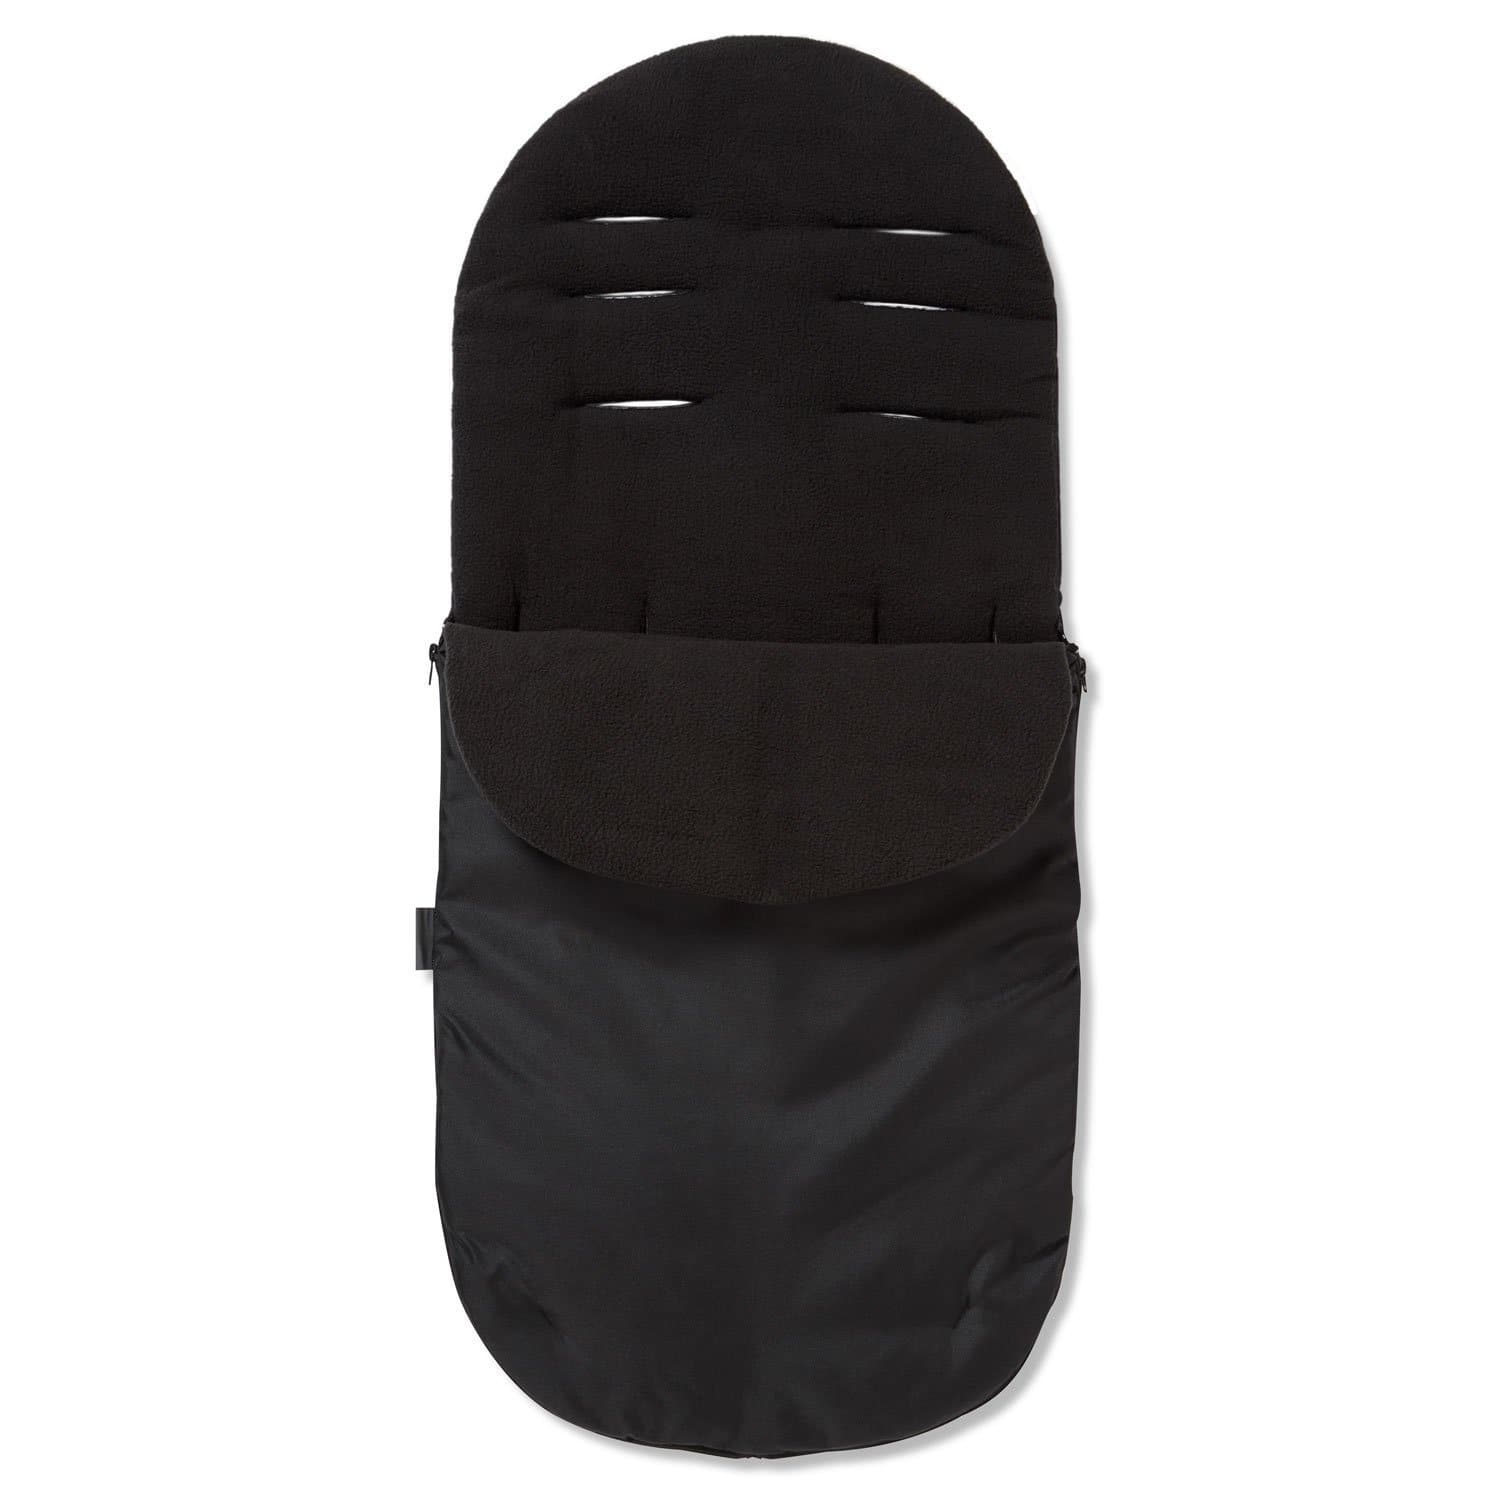 Footmuff / Cosy Toes Compatible with Silver Cross - Black / Fits All Models | For Your Little One